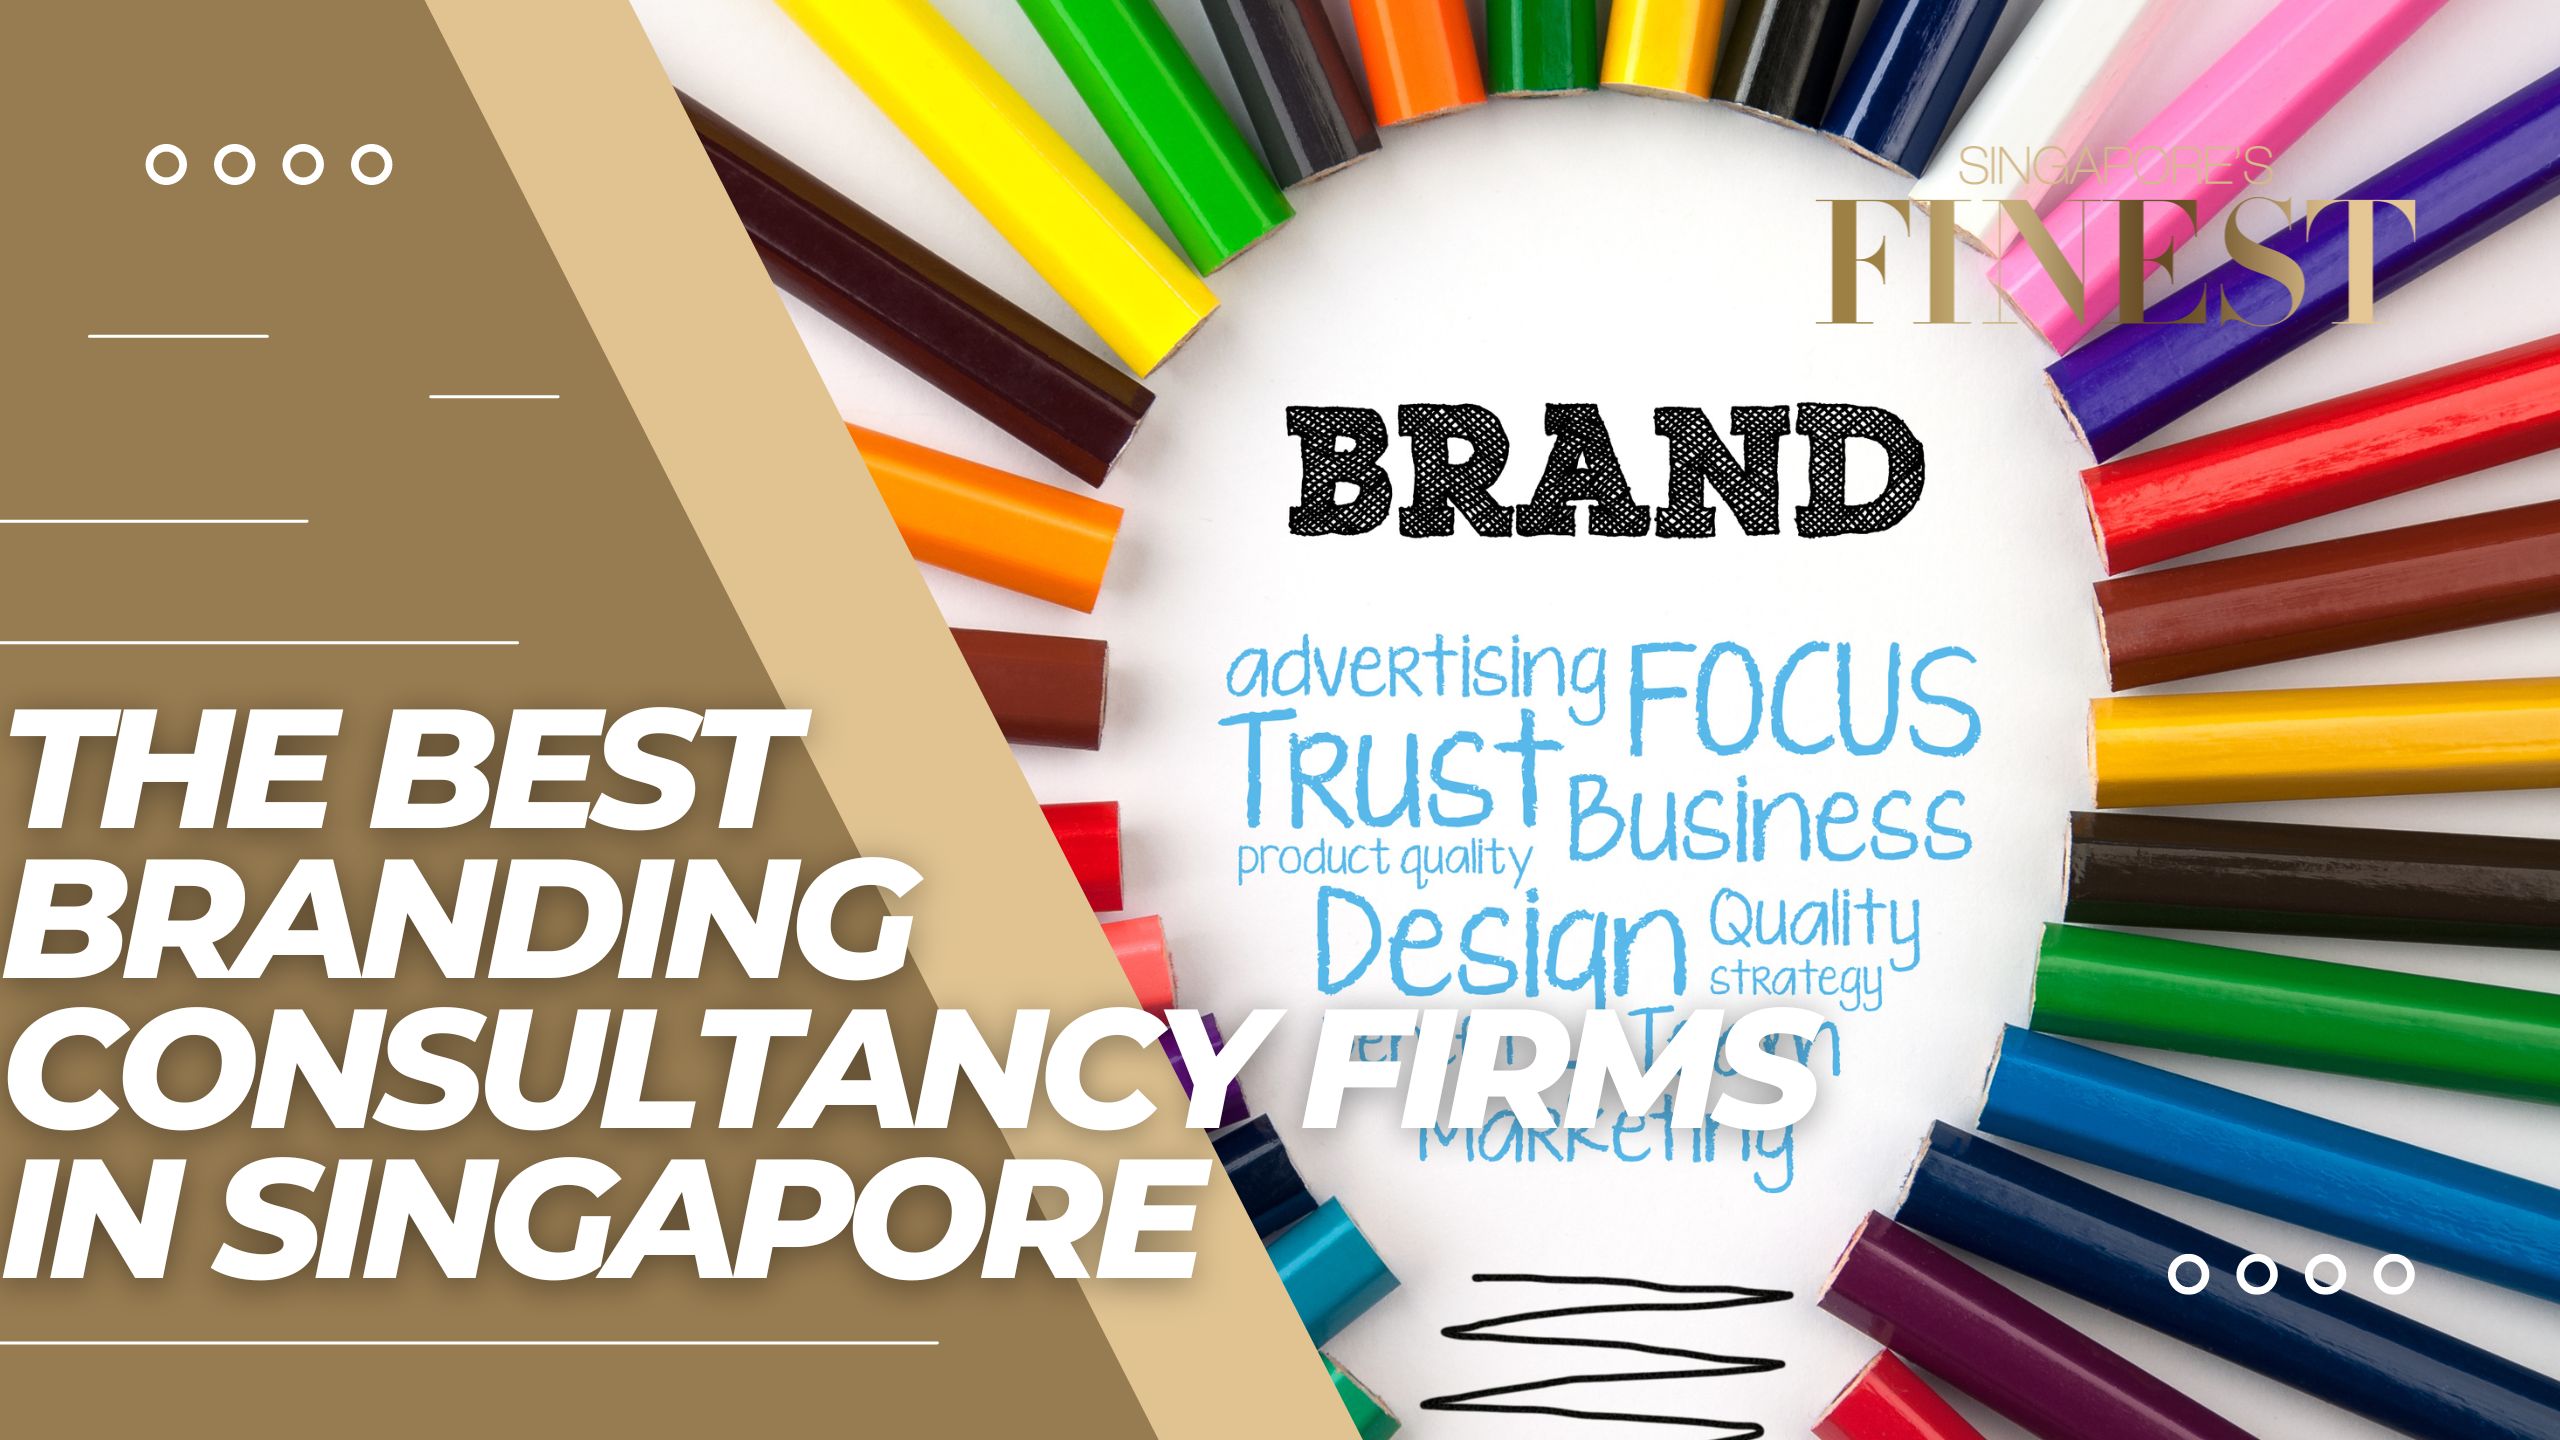 The Finest Branding Consultancy Firms in Singapore